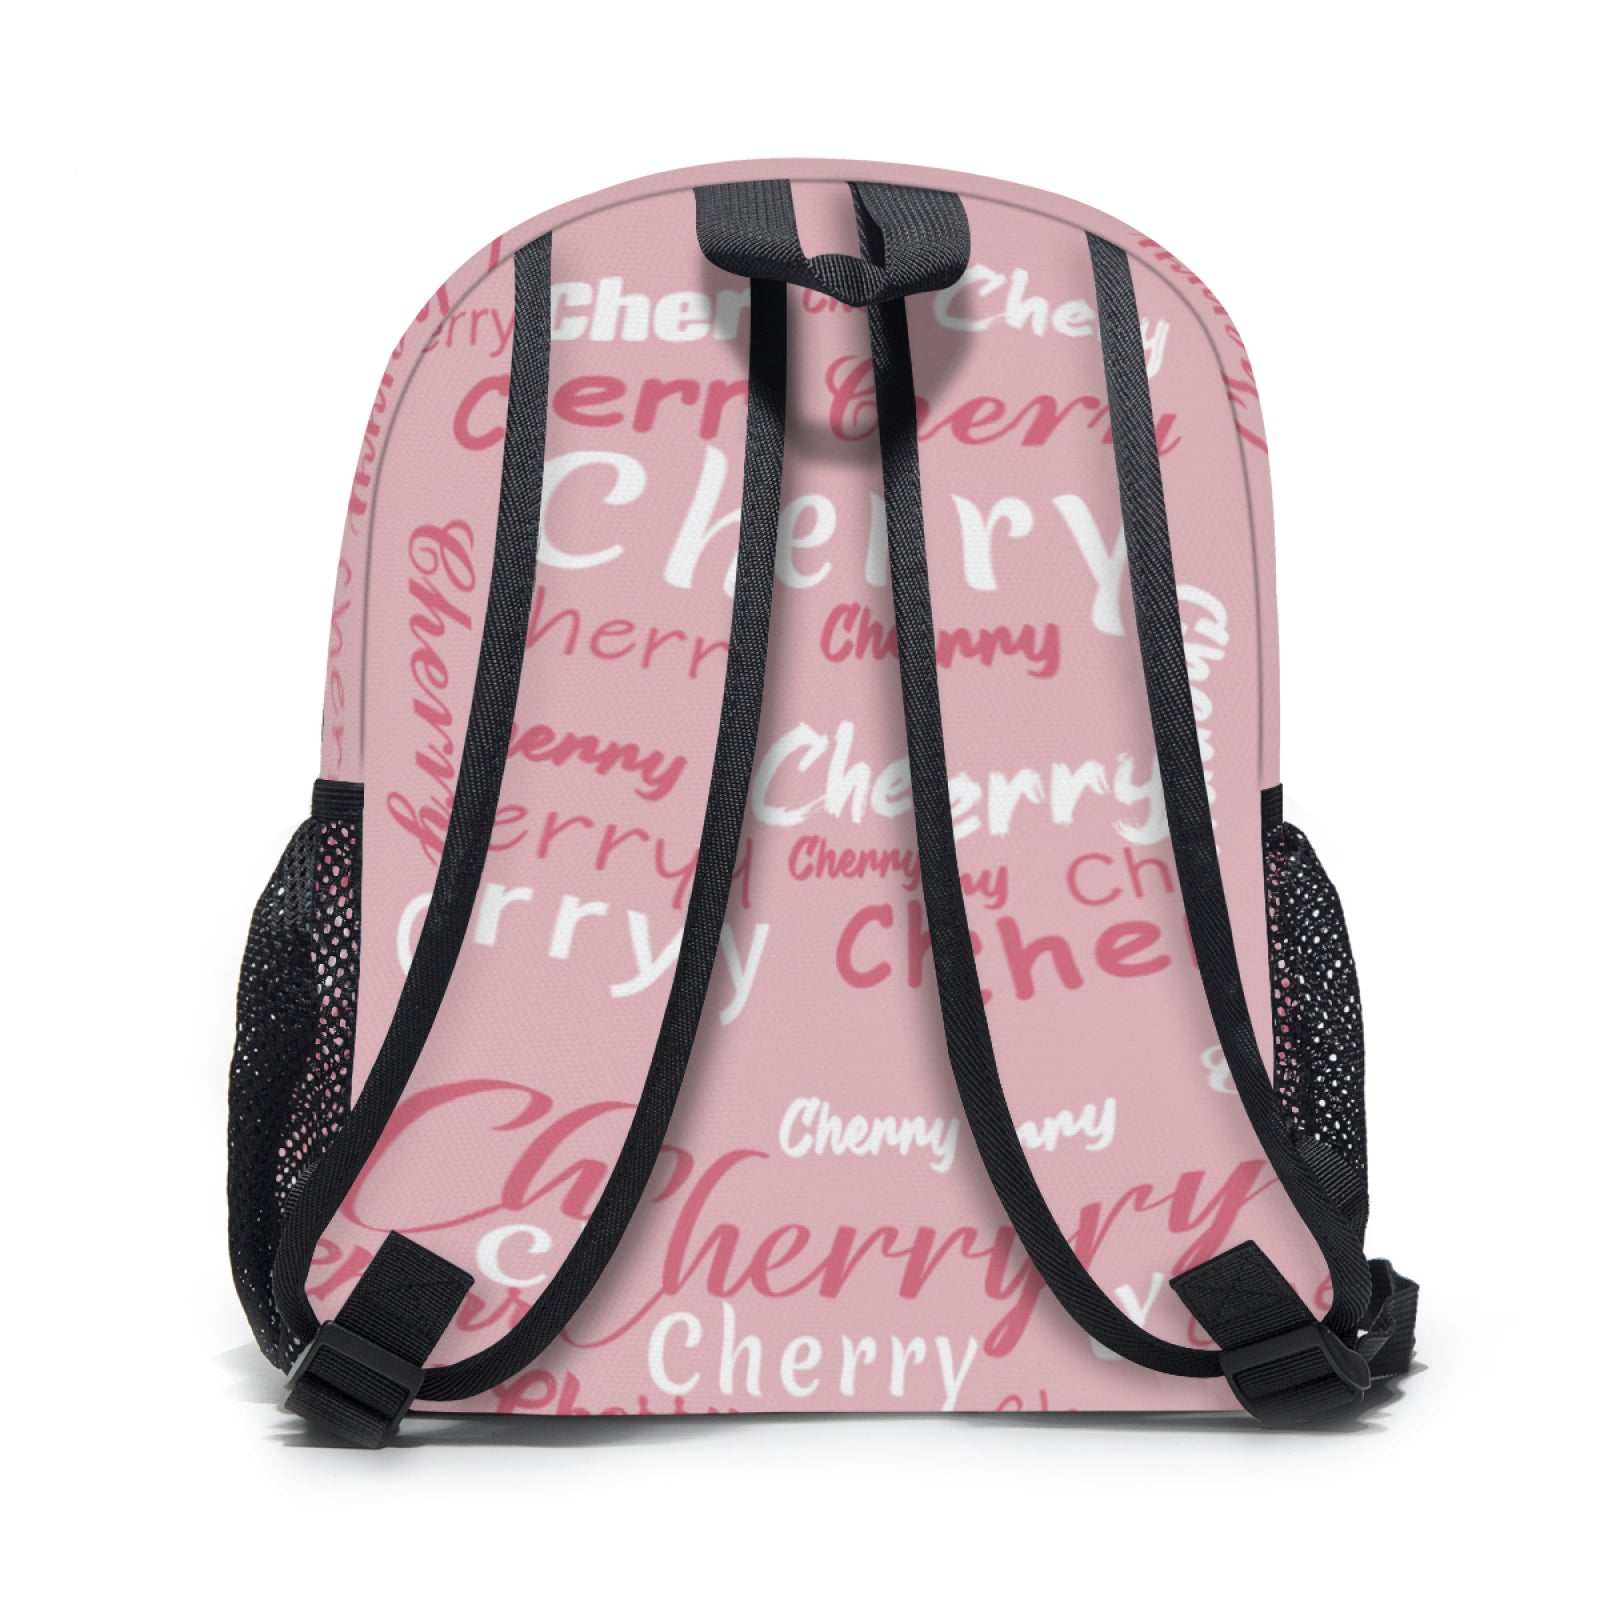 Personalized Name Backpack For Family Kids Friends,Customized Daypack Schoolbag for Kids Students Bookbag, Back to School Gifts